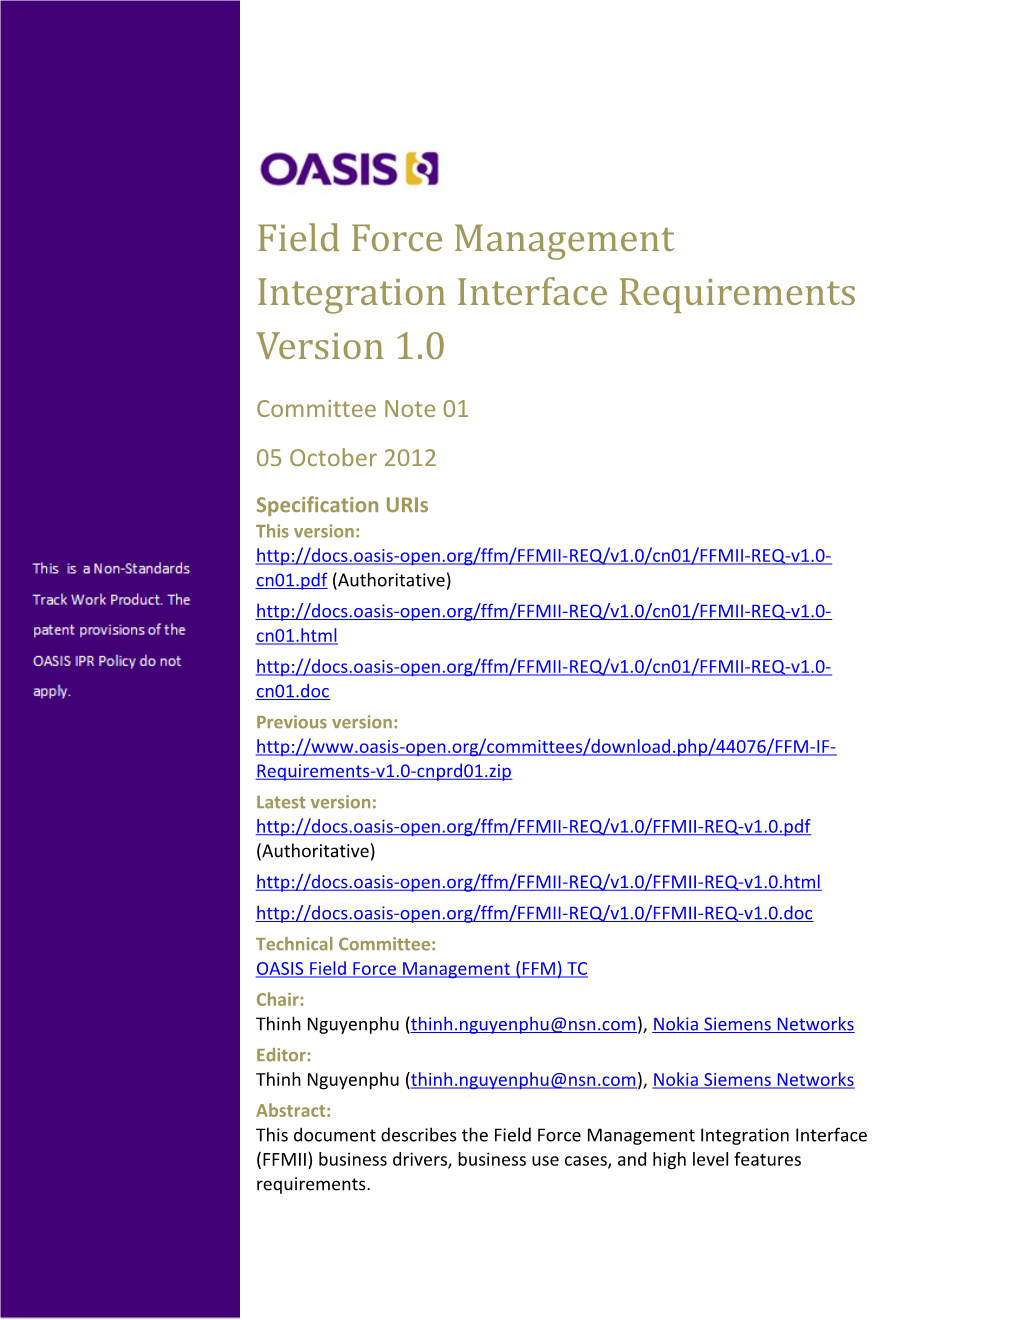 Field Force Management Integration Interface Requirements Version 1.0